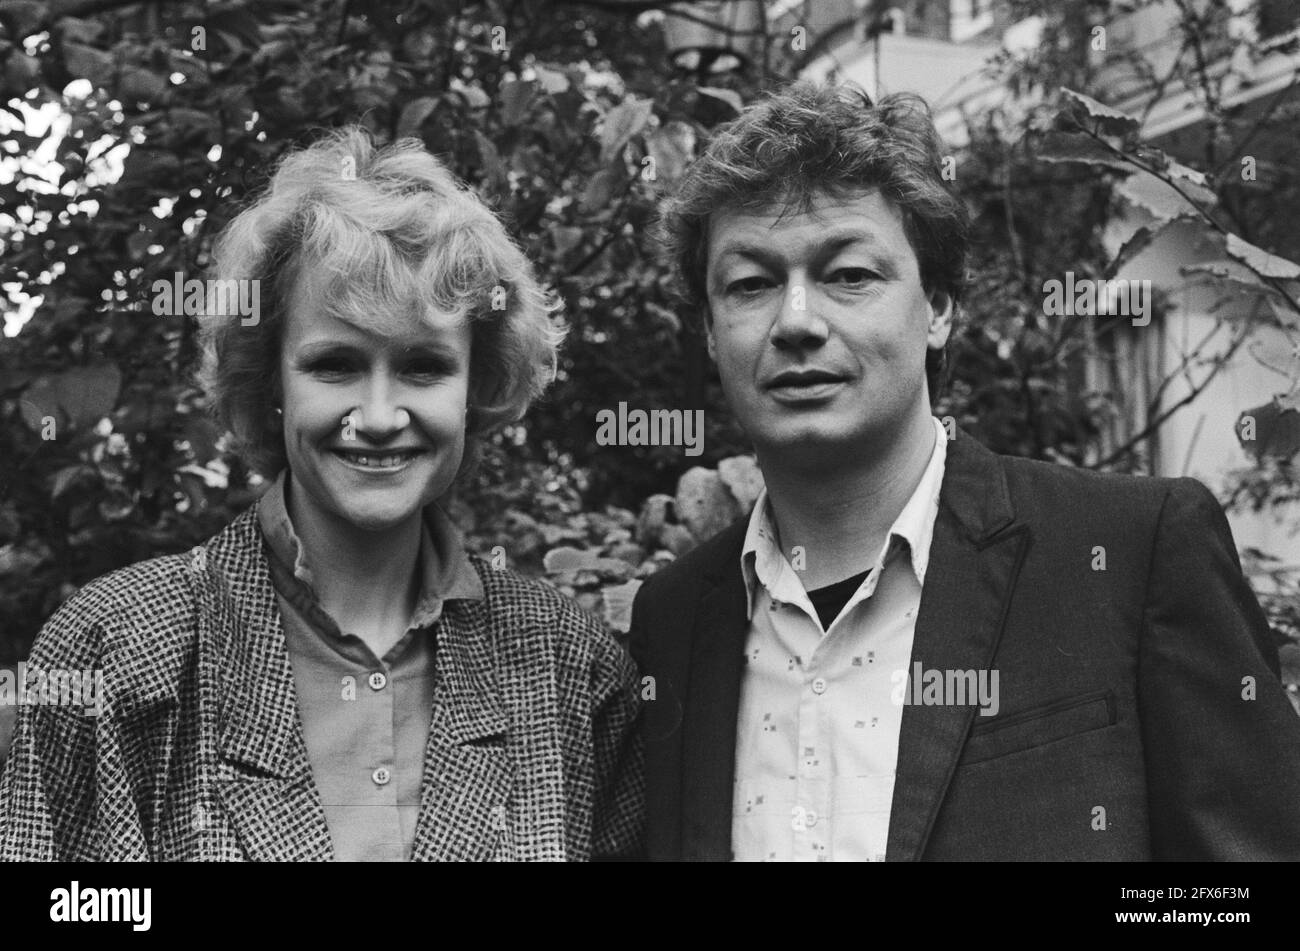 Hetty Heyting and Jan-Simon Minkema, October 28, 1985, The Netherlands, 20th century press agency photo, news to remember, documentary, historic photography 1945-1990, visual stories, human history of the Twentieth Century, capturing moments in time Stock Photo